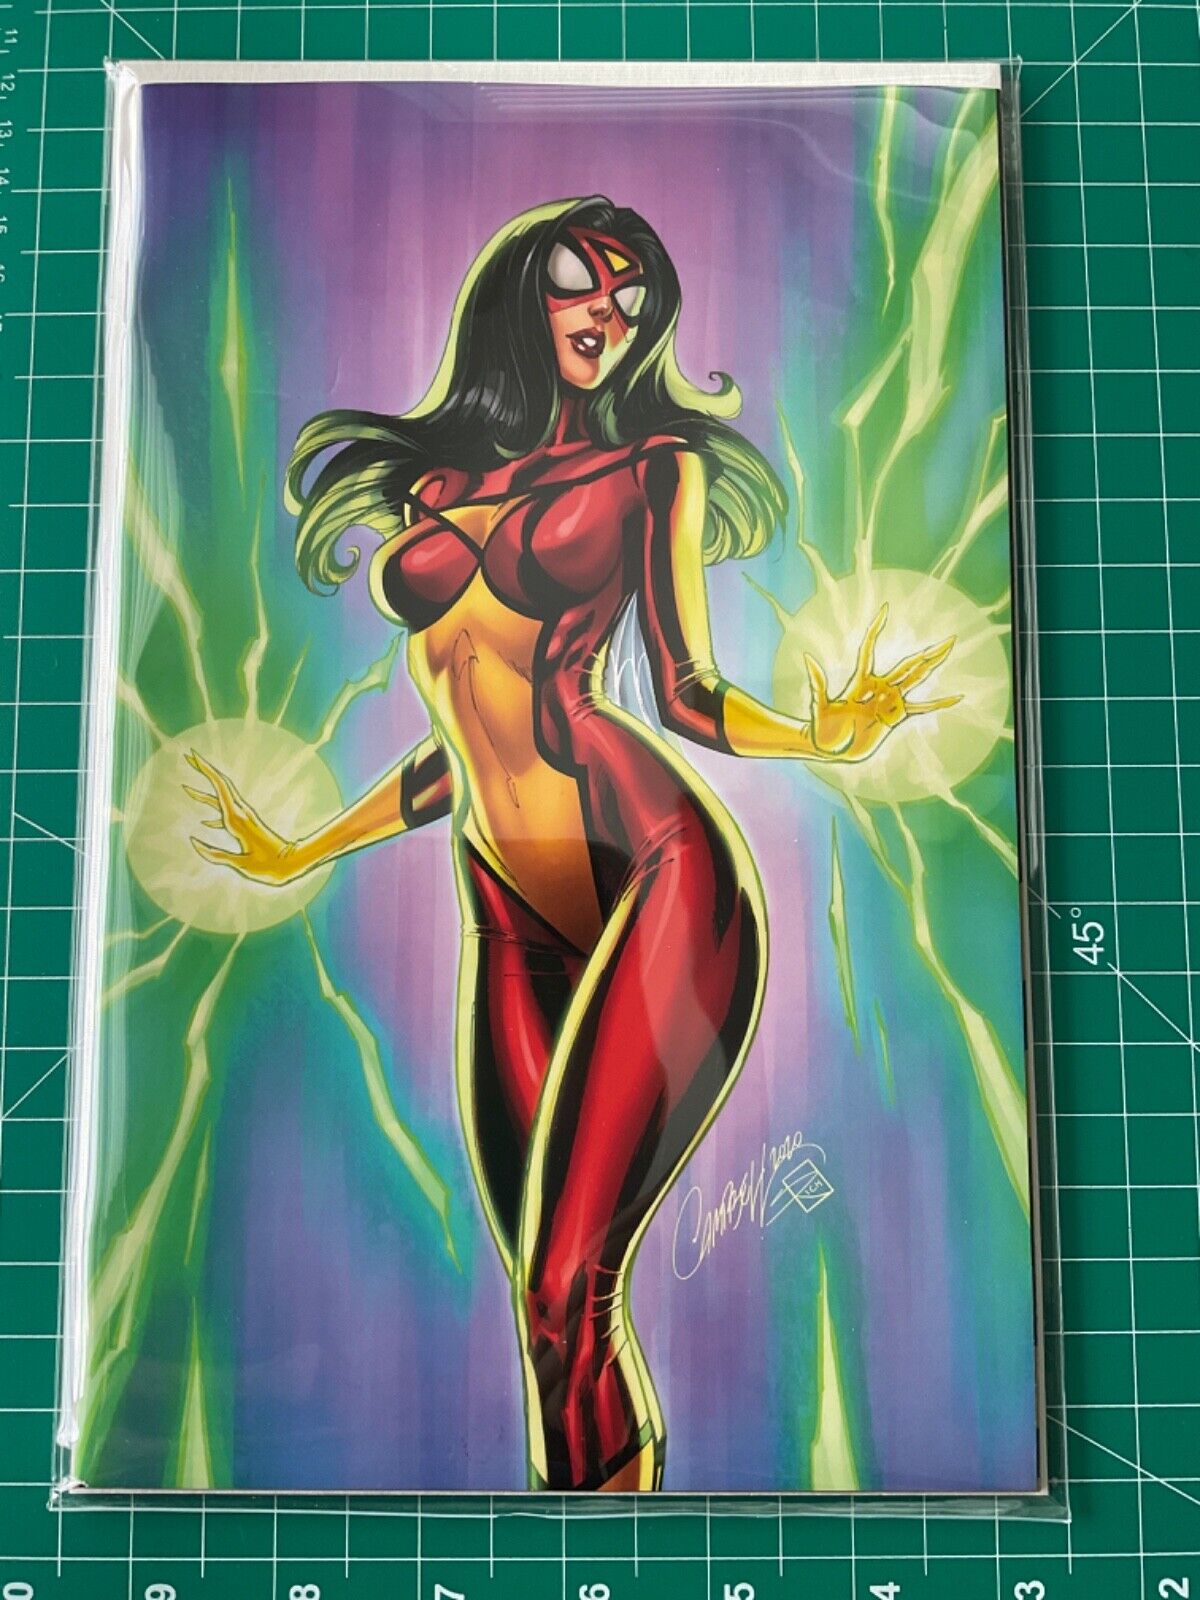 SPIDER-WOMAN ISSUE #1 - J. SCOTT CAMPBELL - VIRGIN (LIMITED 3000)